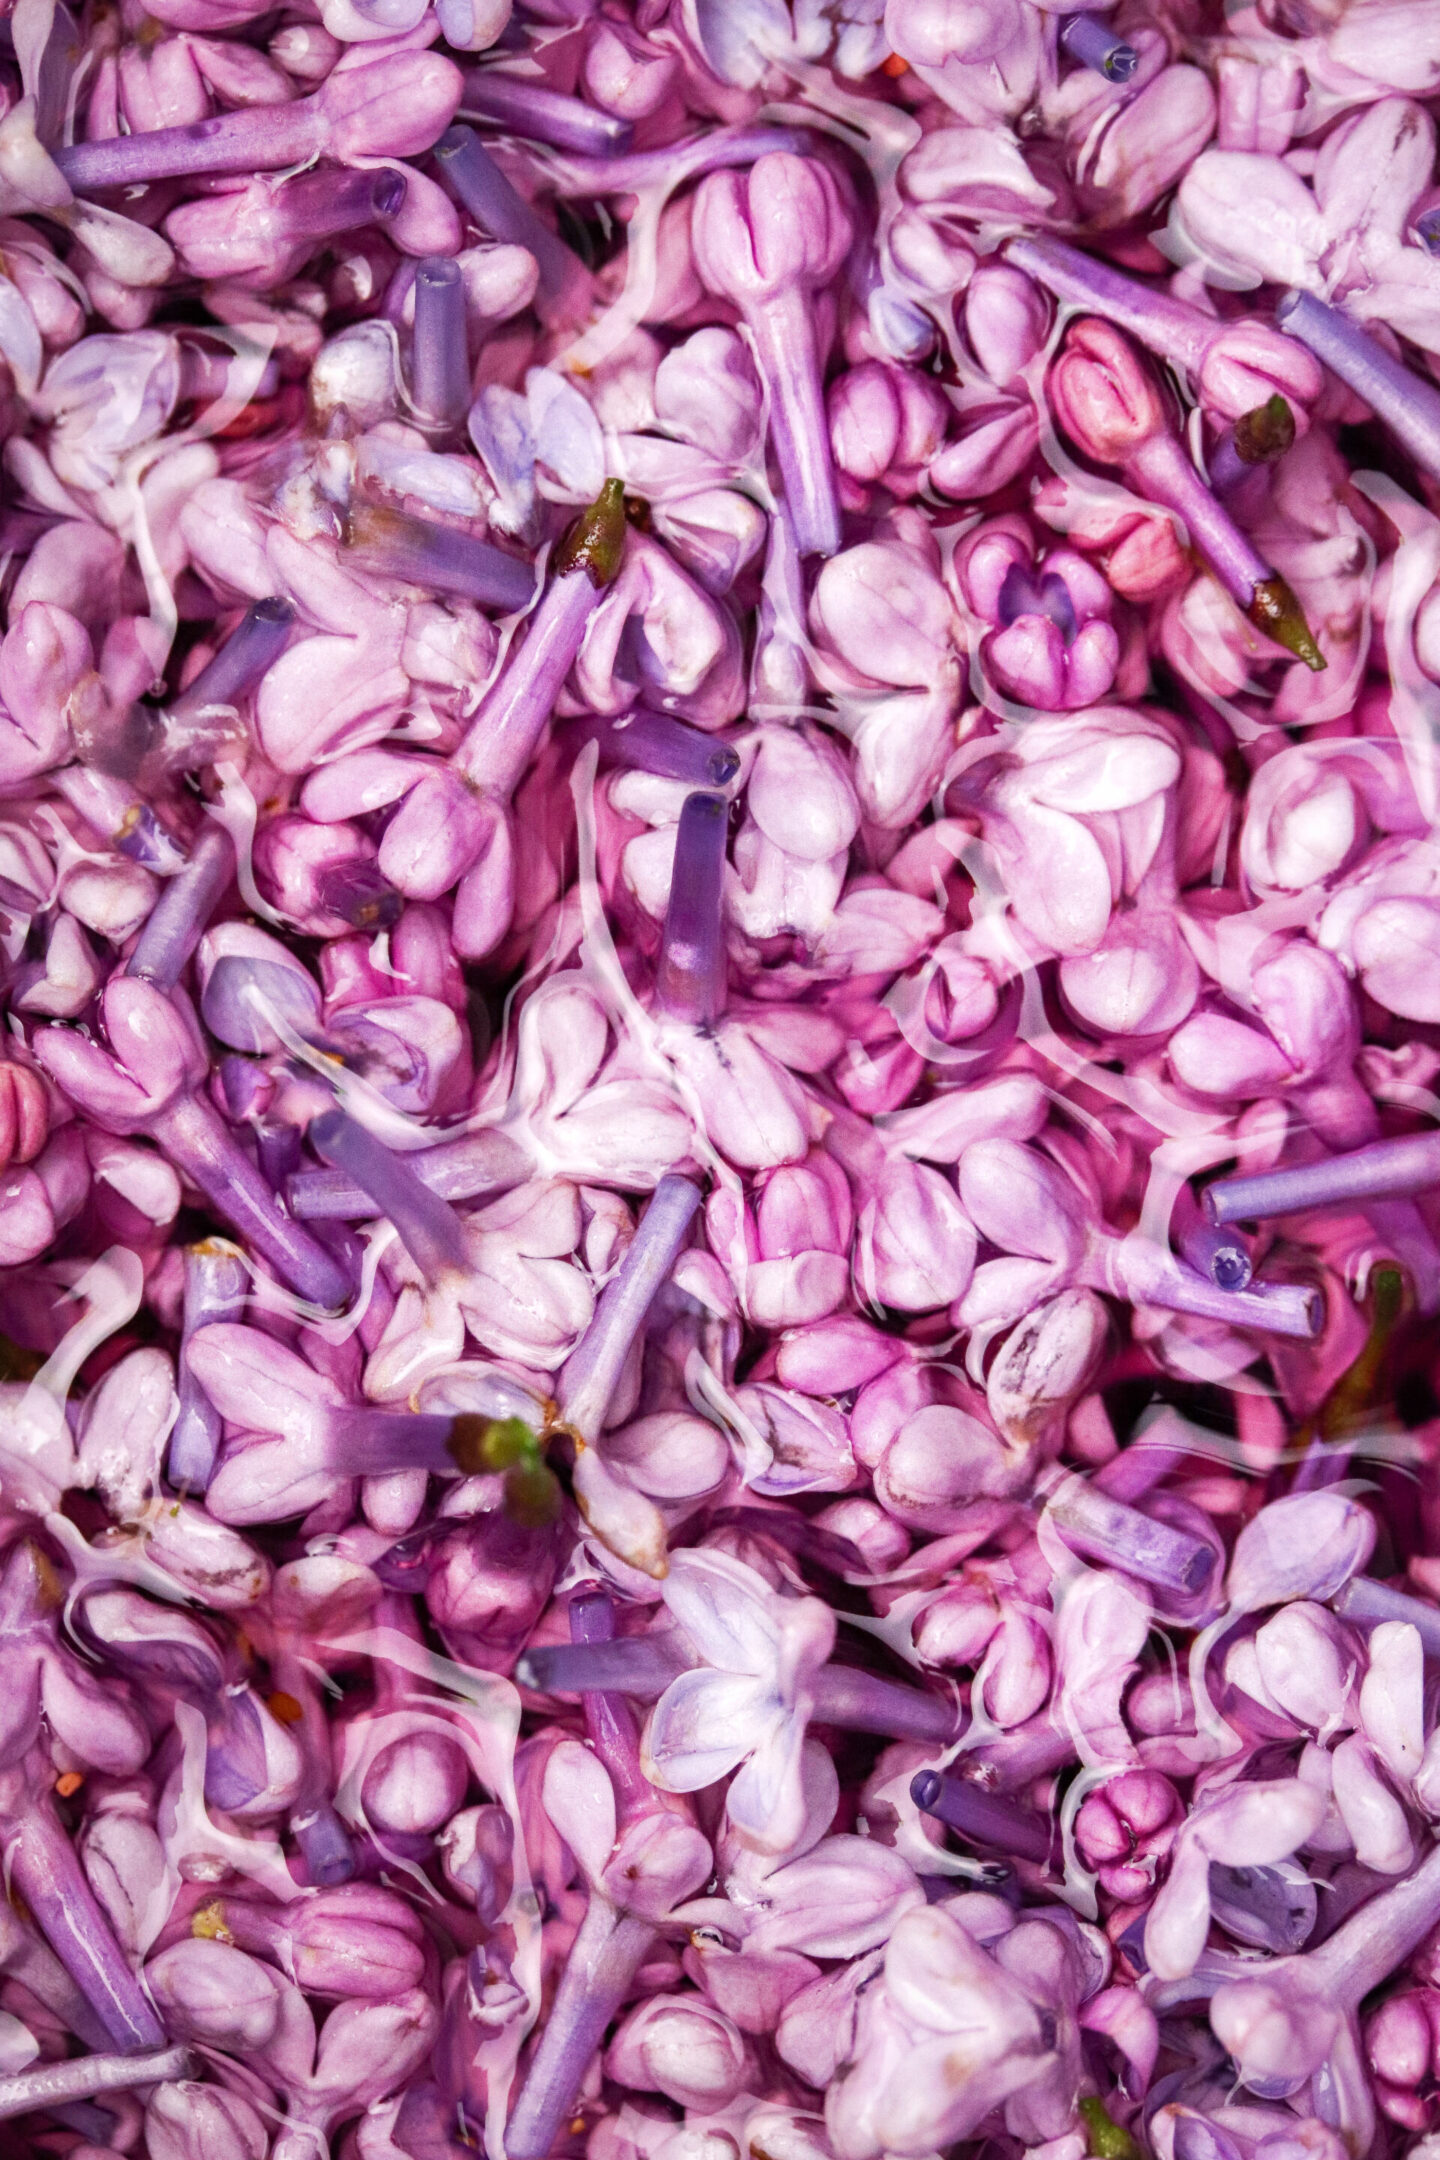 Lilac Syrup – Perfect on anything from ice cream to drinks